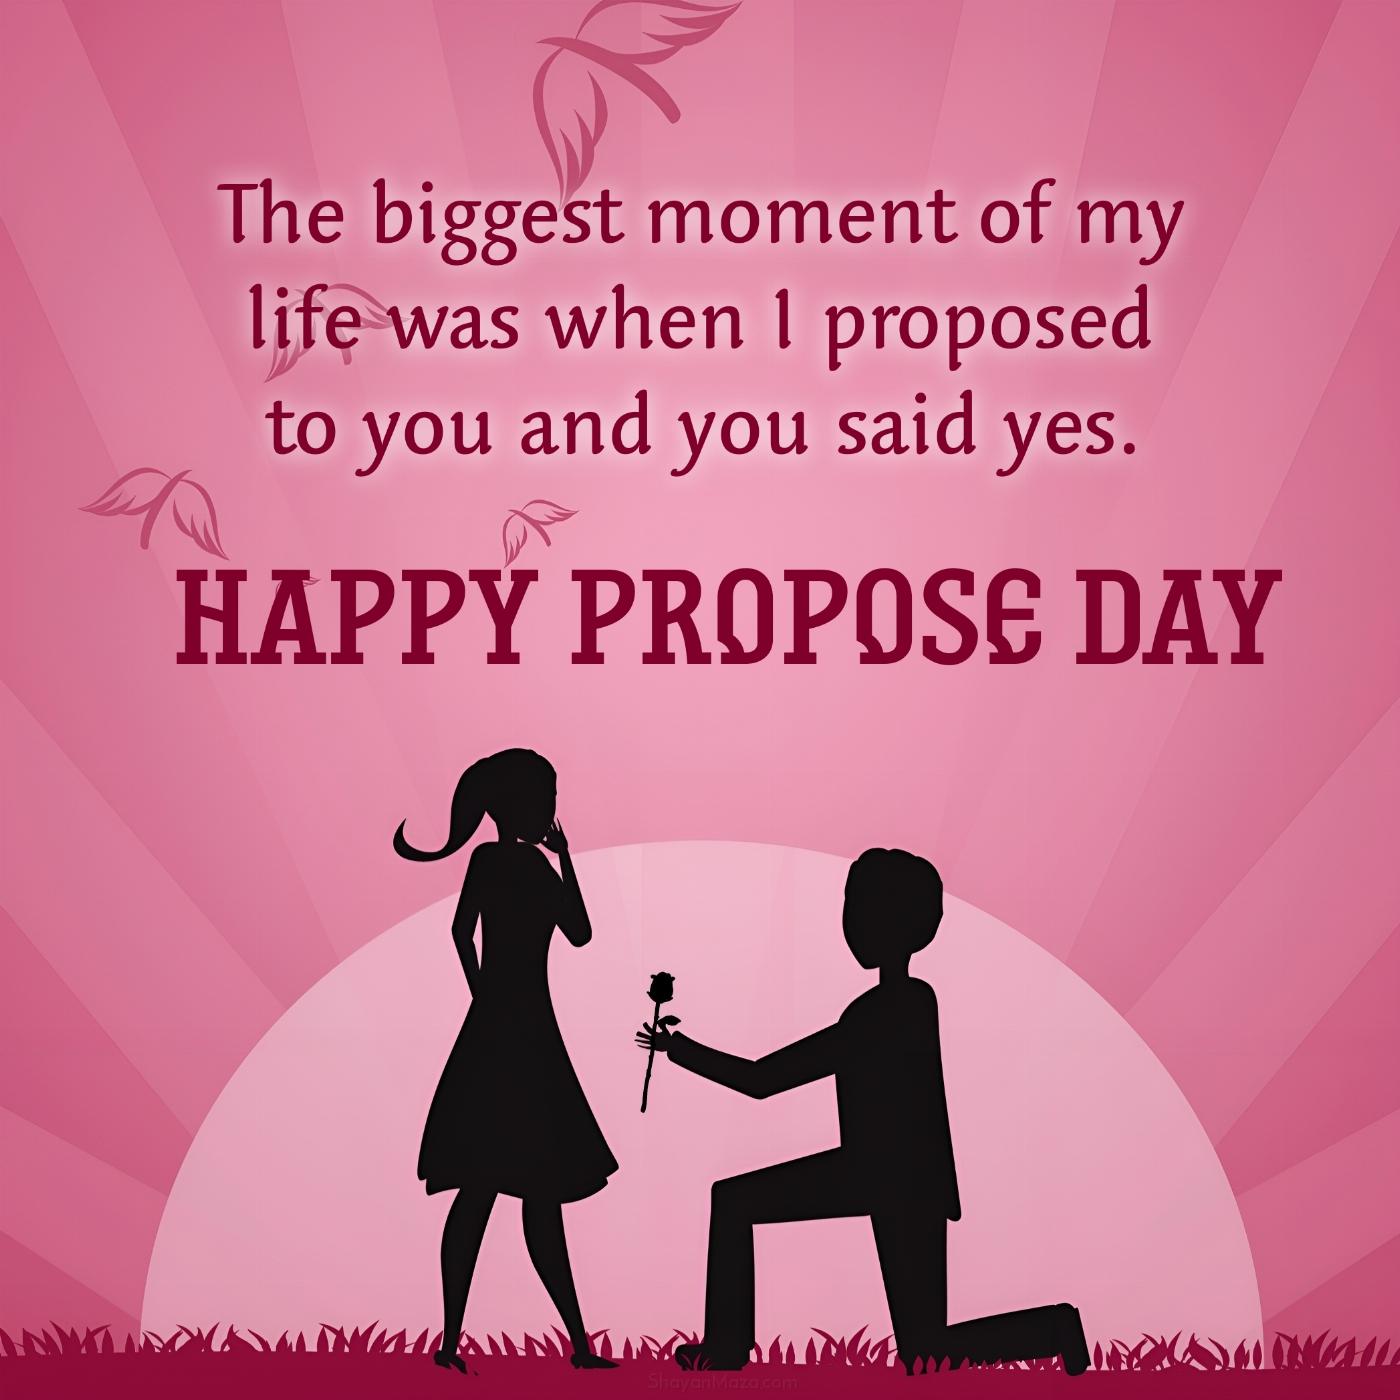 The biggest moment of my life was when I proposed to you